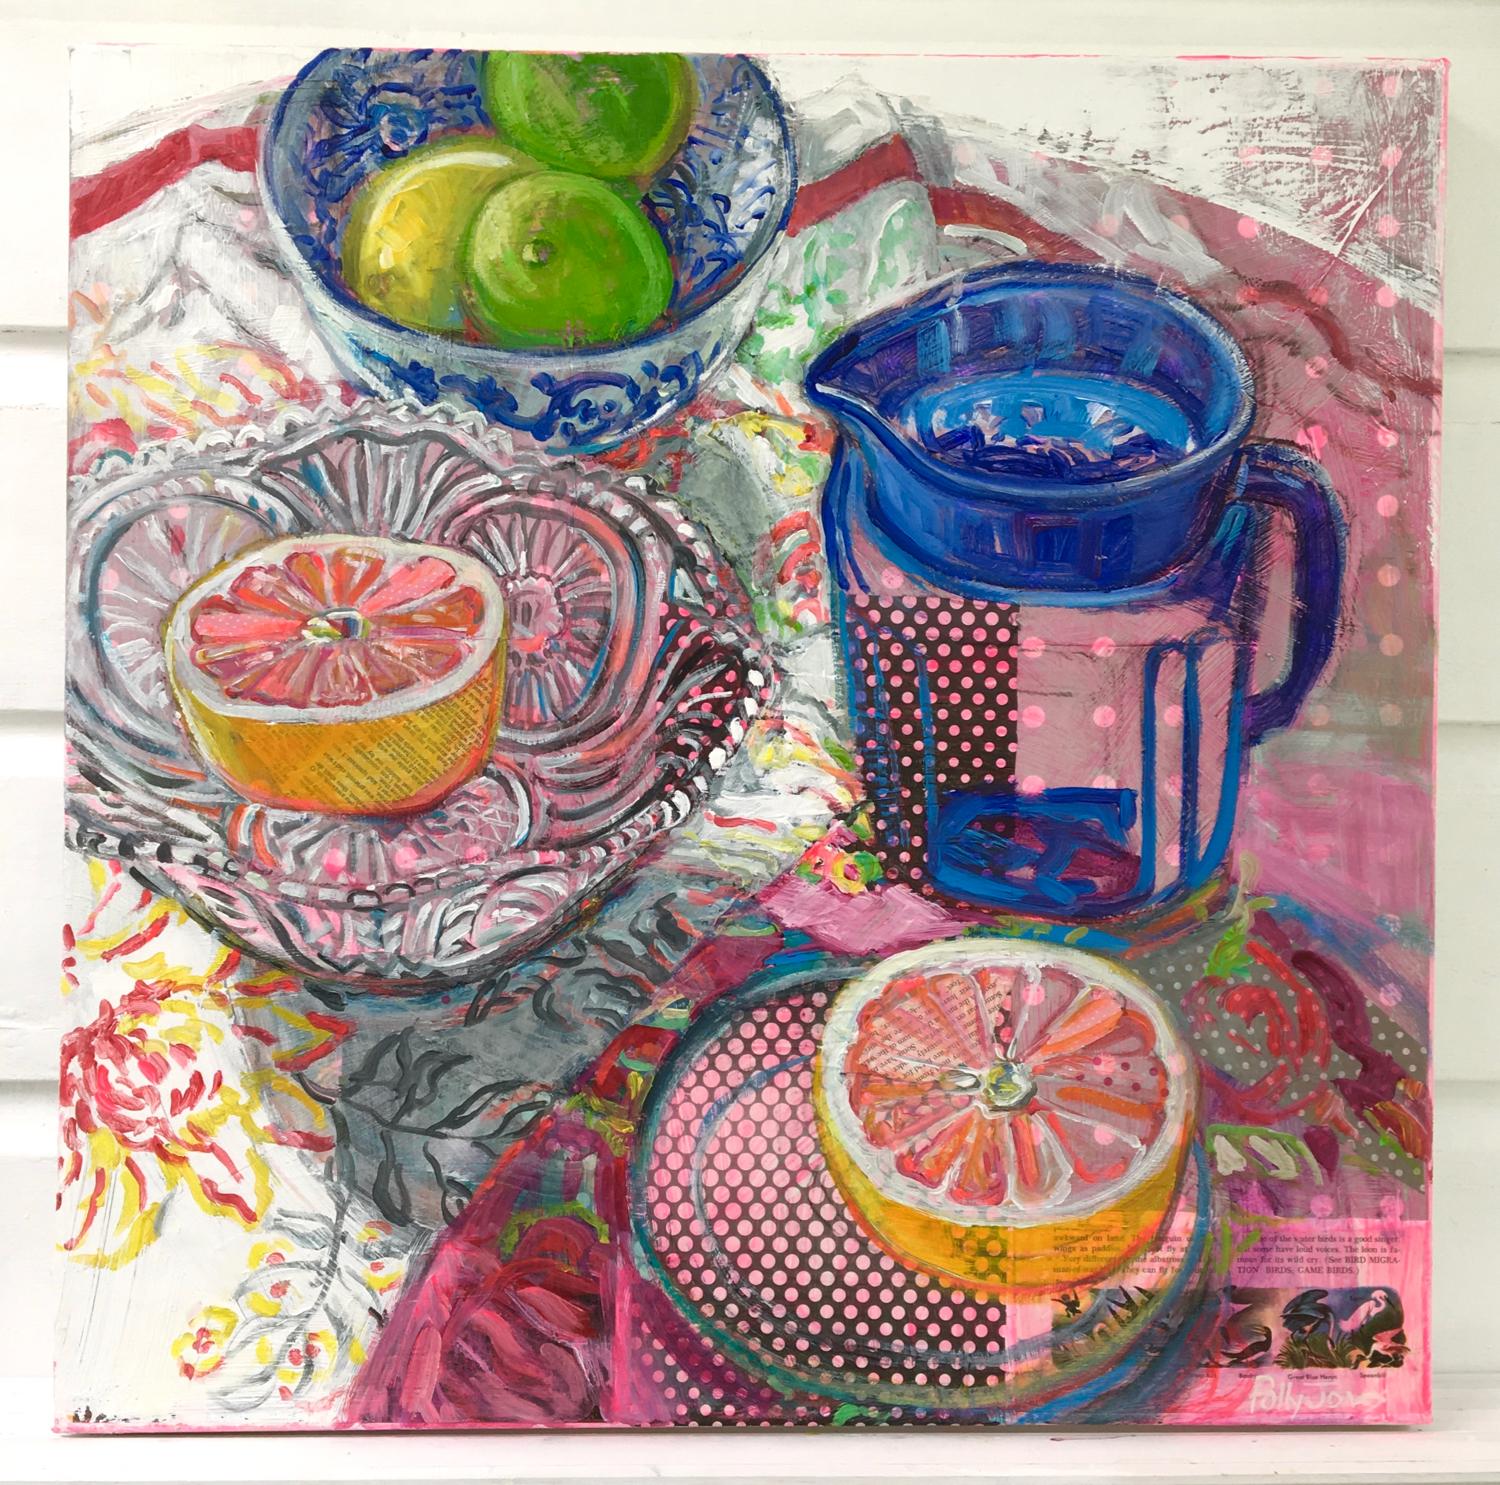 <p>Artist Comments<br />The morning light in my studio is magical on sunny days. I painted this from life to capture a lovely series of moments and the shimmer of light on cloth, glass and fruit. The polka dot pattern of paper showing through washes